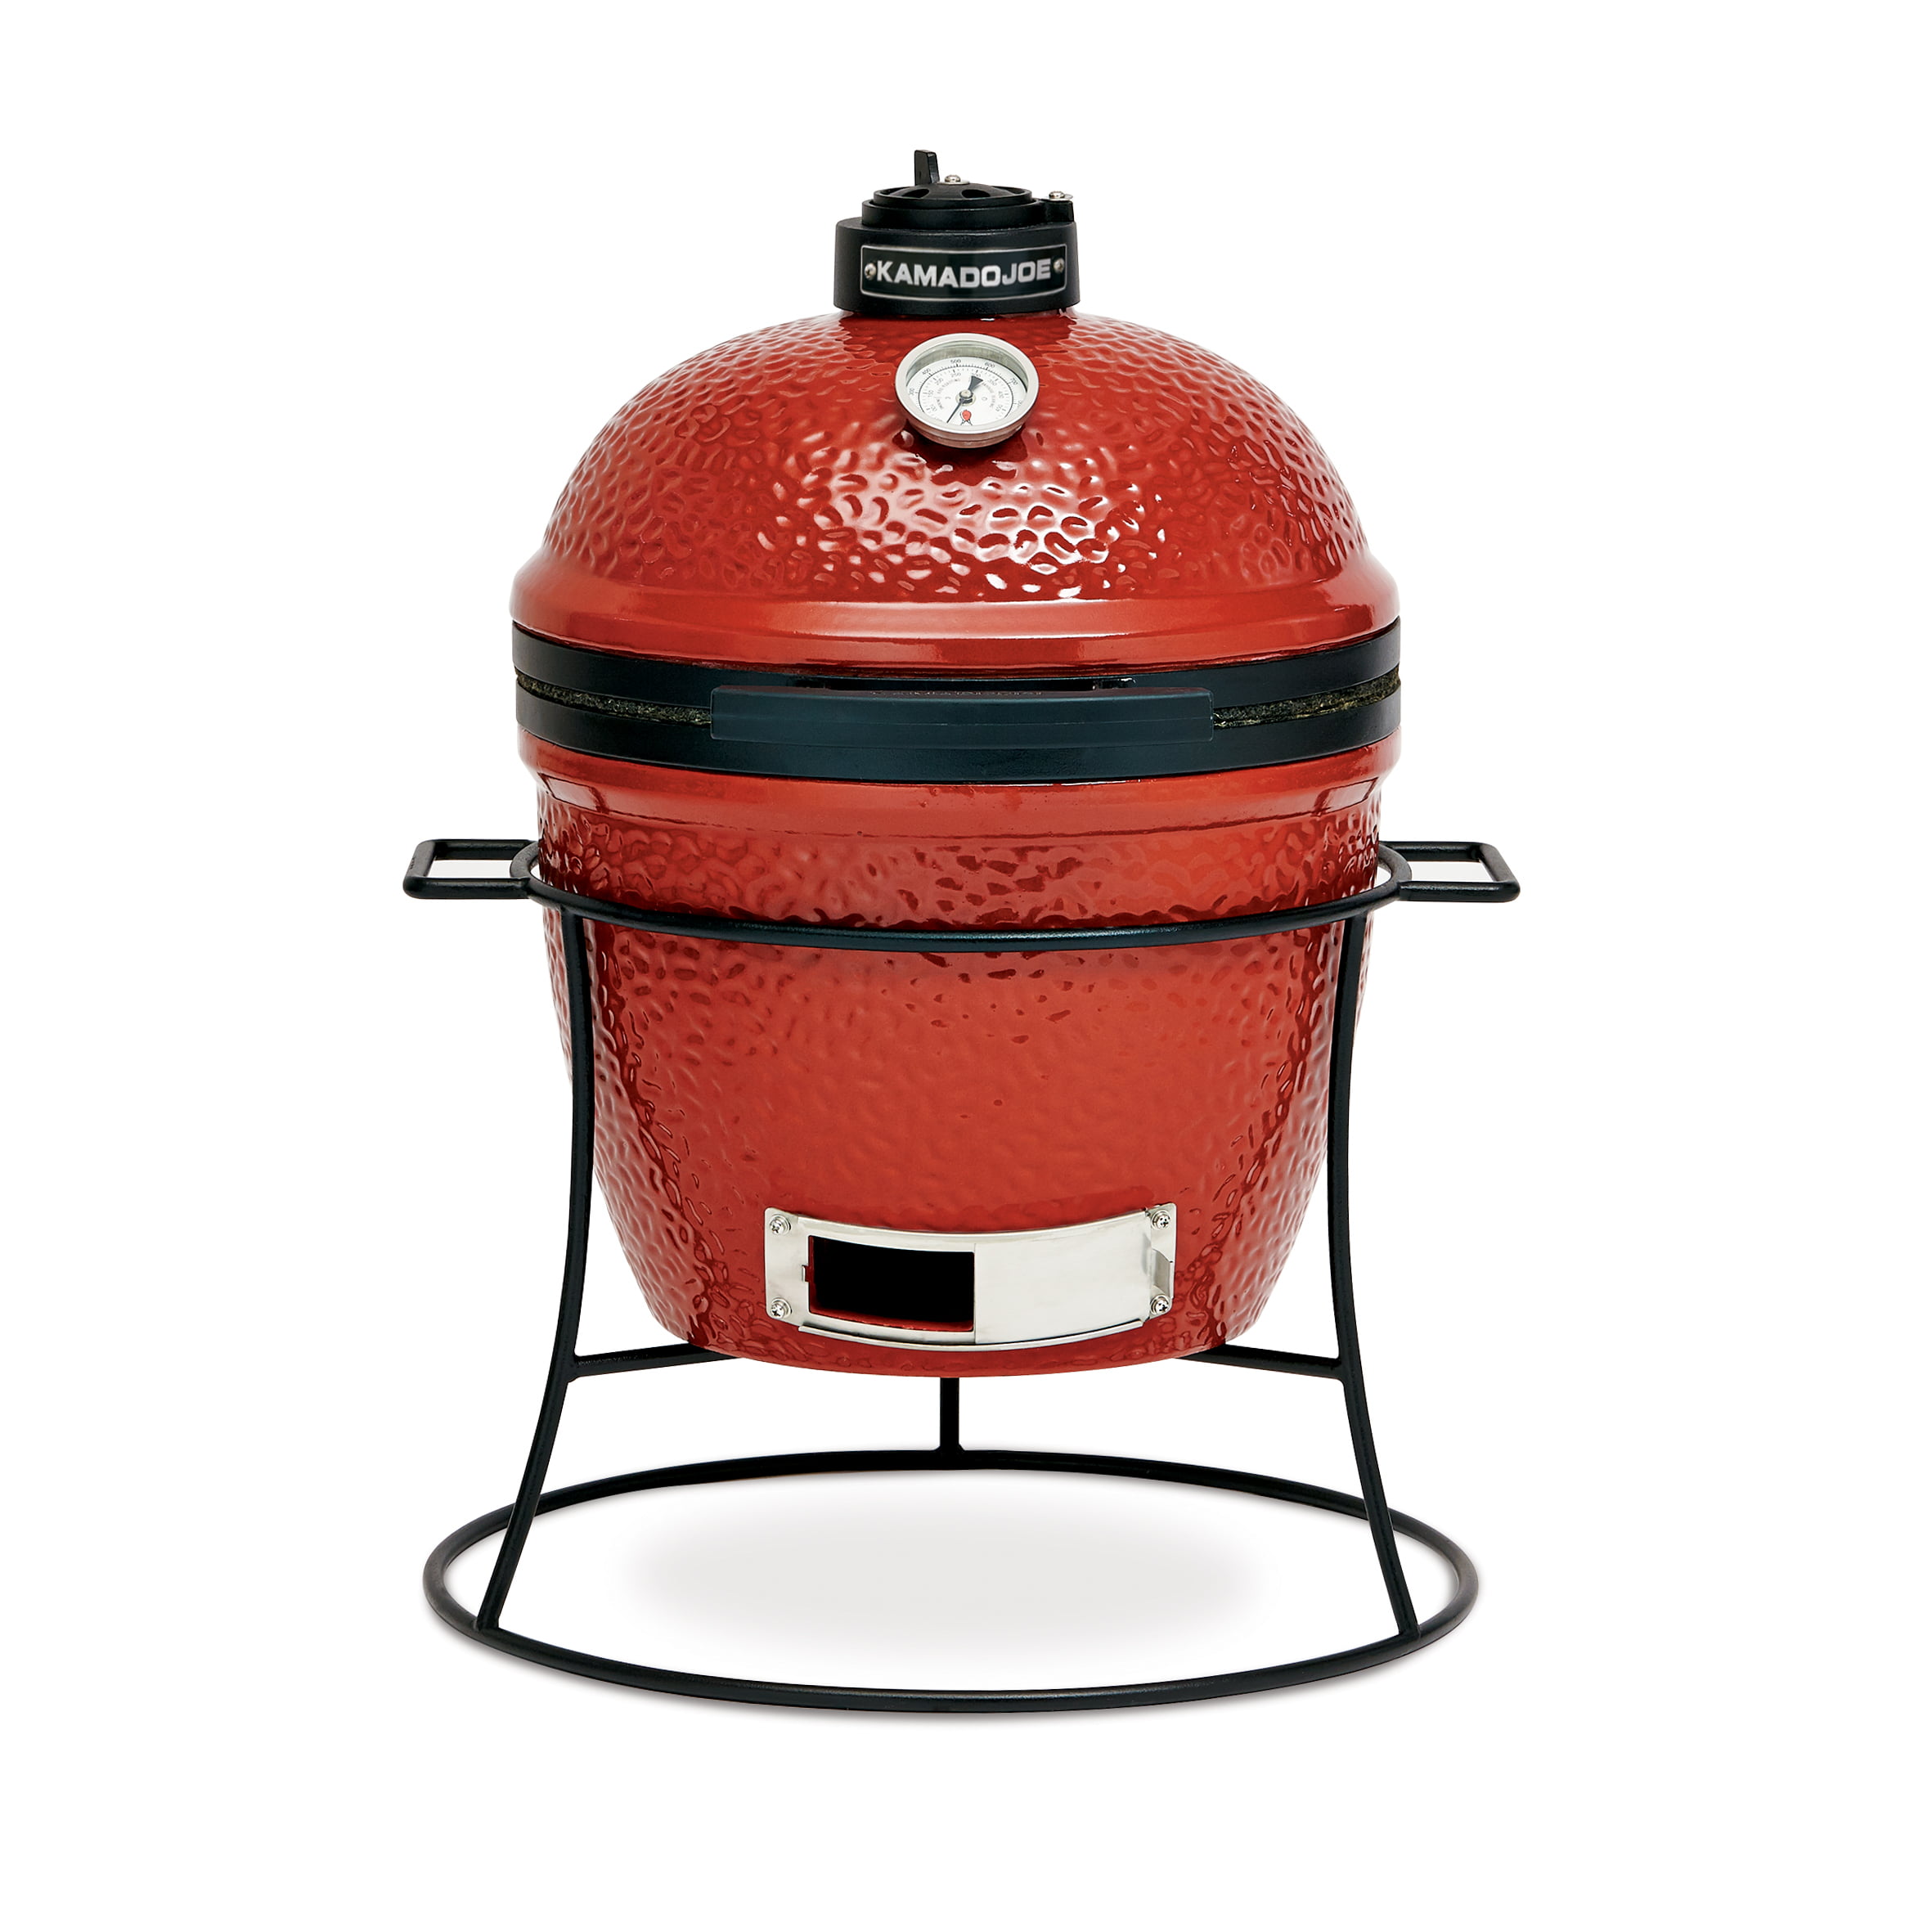 Joe Jr. 13.5 in. Portable Charcoal Grill in Red with Cast Iron Cart, Heat Deflectors and Ash Tool $349.97